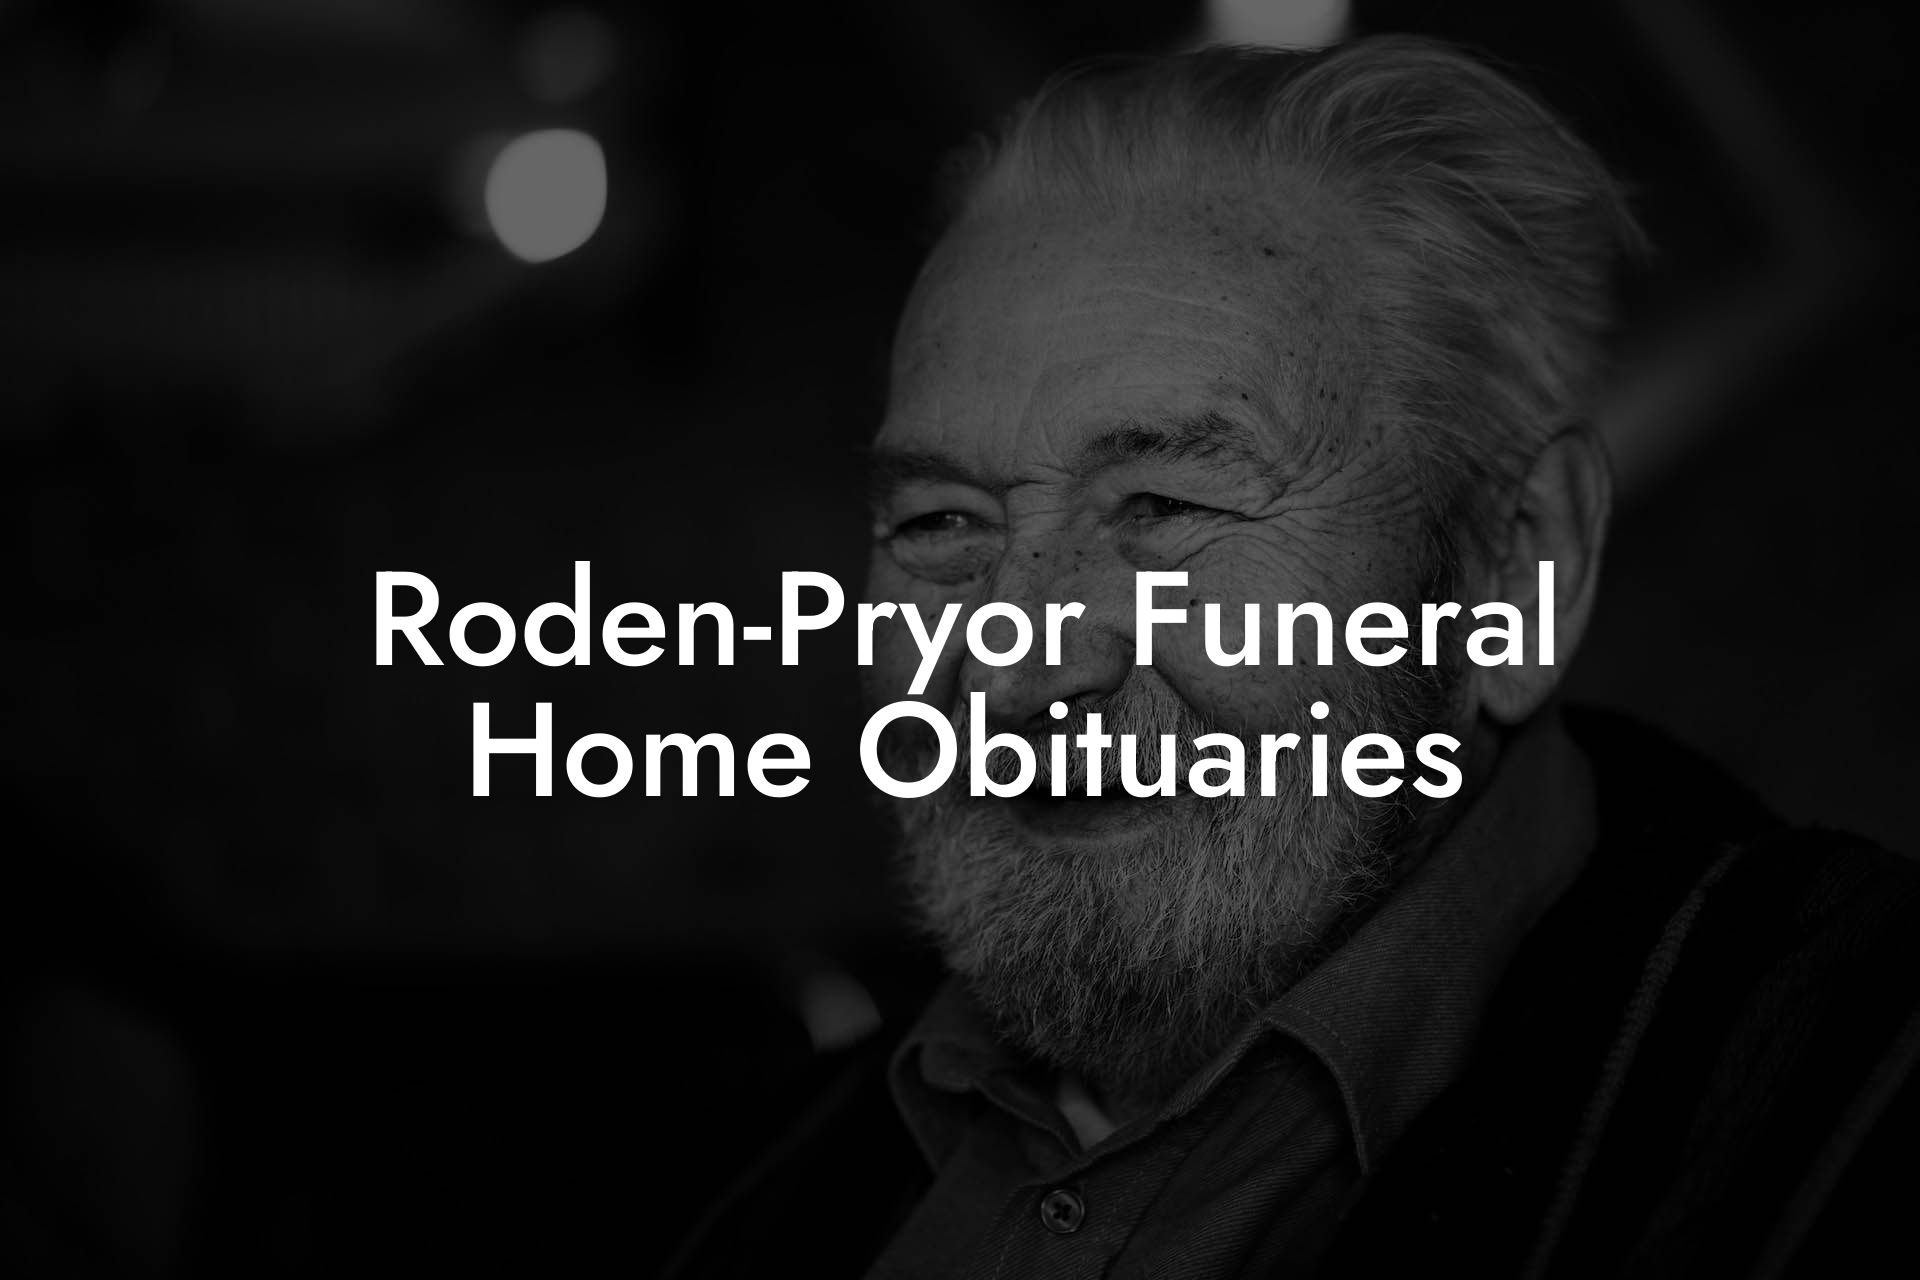 Roden-Pryor Funeral Home Obituaries